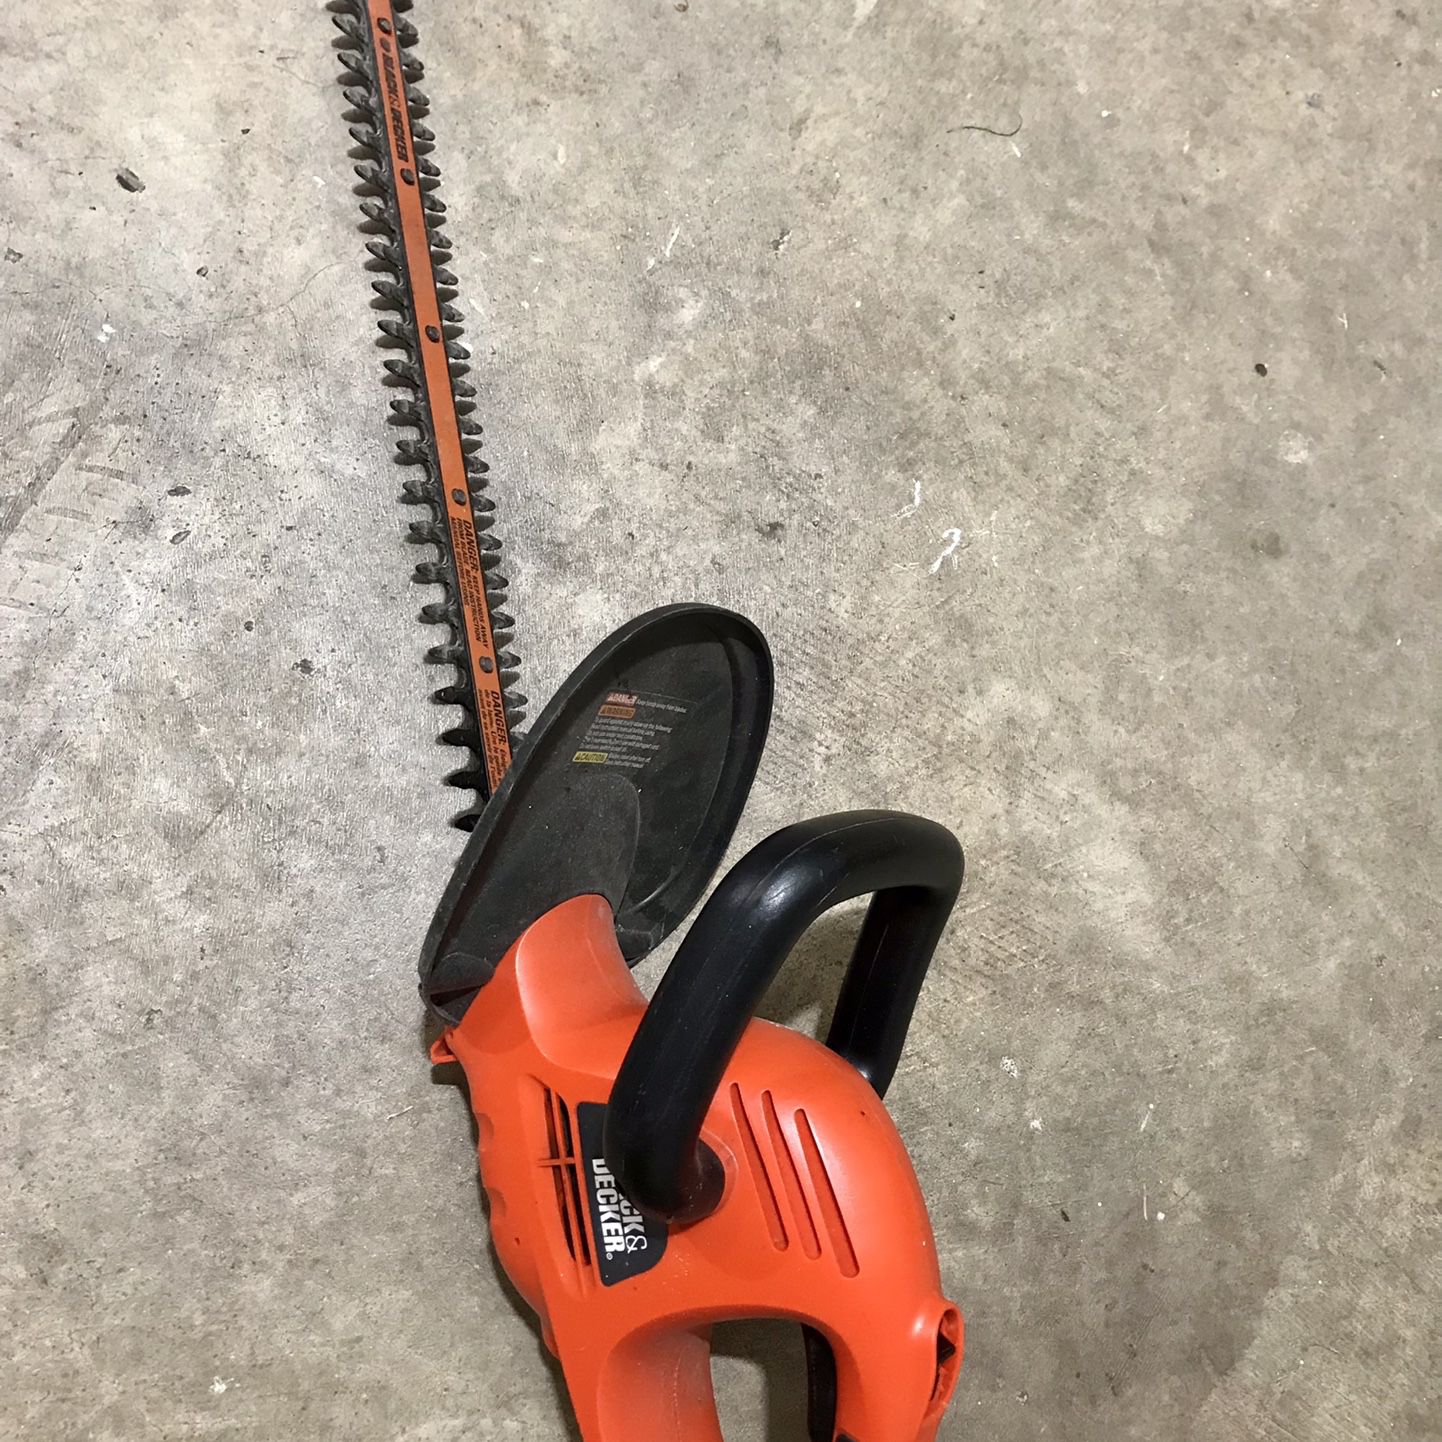 Black & Decker Electric Hedge Trimmer for Sale in Maple Valley, WA - OfferUp